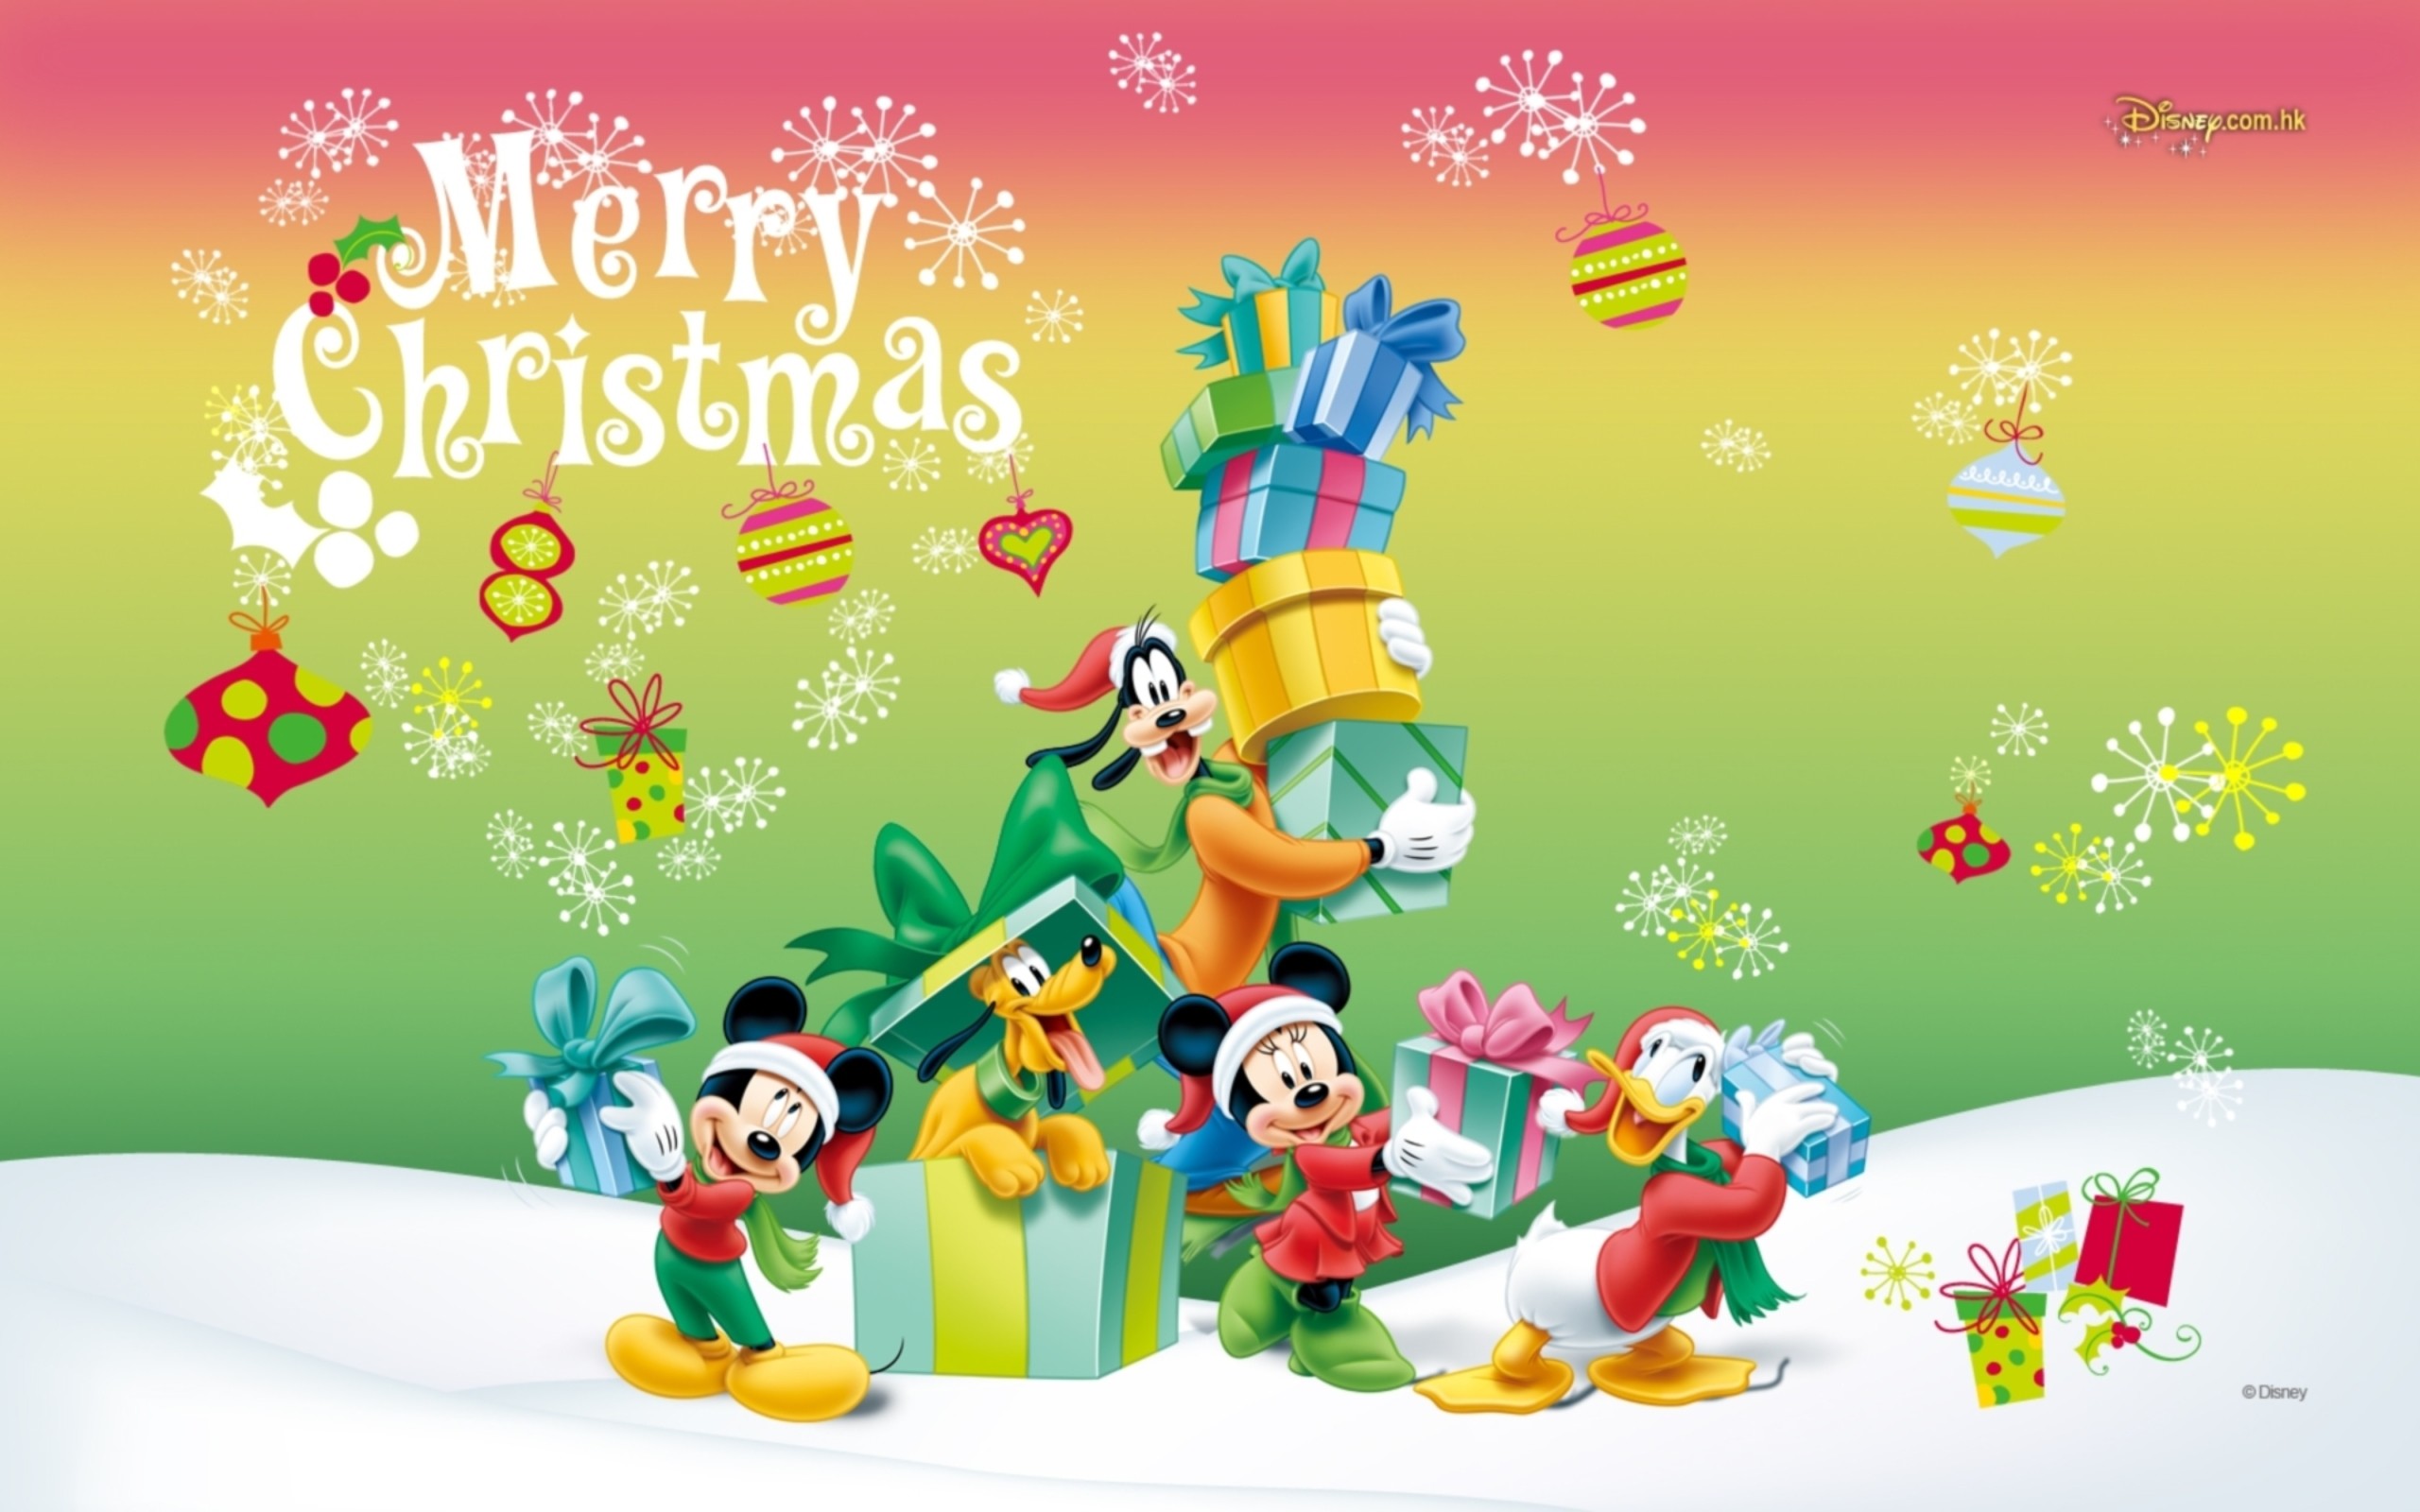 Cartoon characters on Christmas wallpapers and images – wallpapers